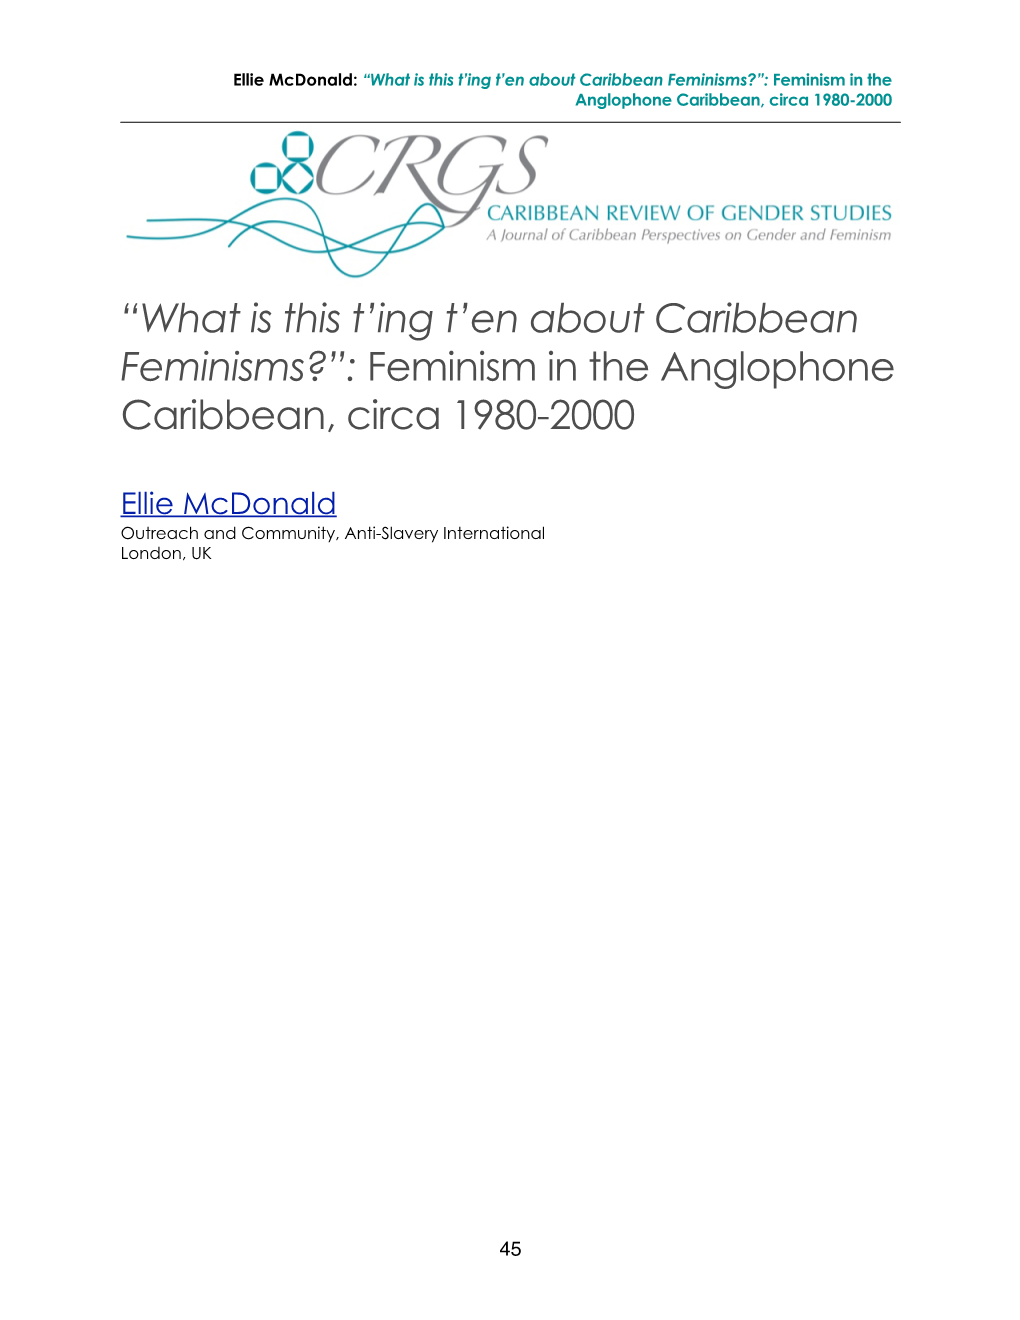 “What Is This T'ing T'en About Caribbean Feminisms?”: Feminism in the Anglophone Caribbean, Circa 1980-2000